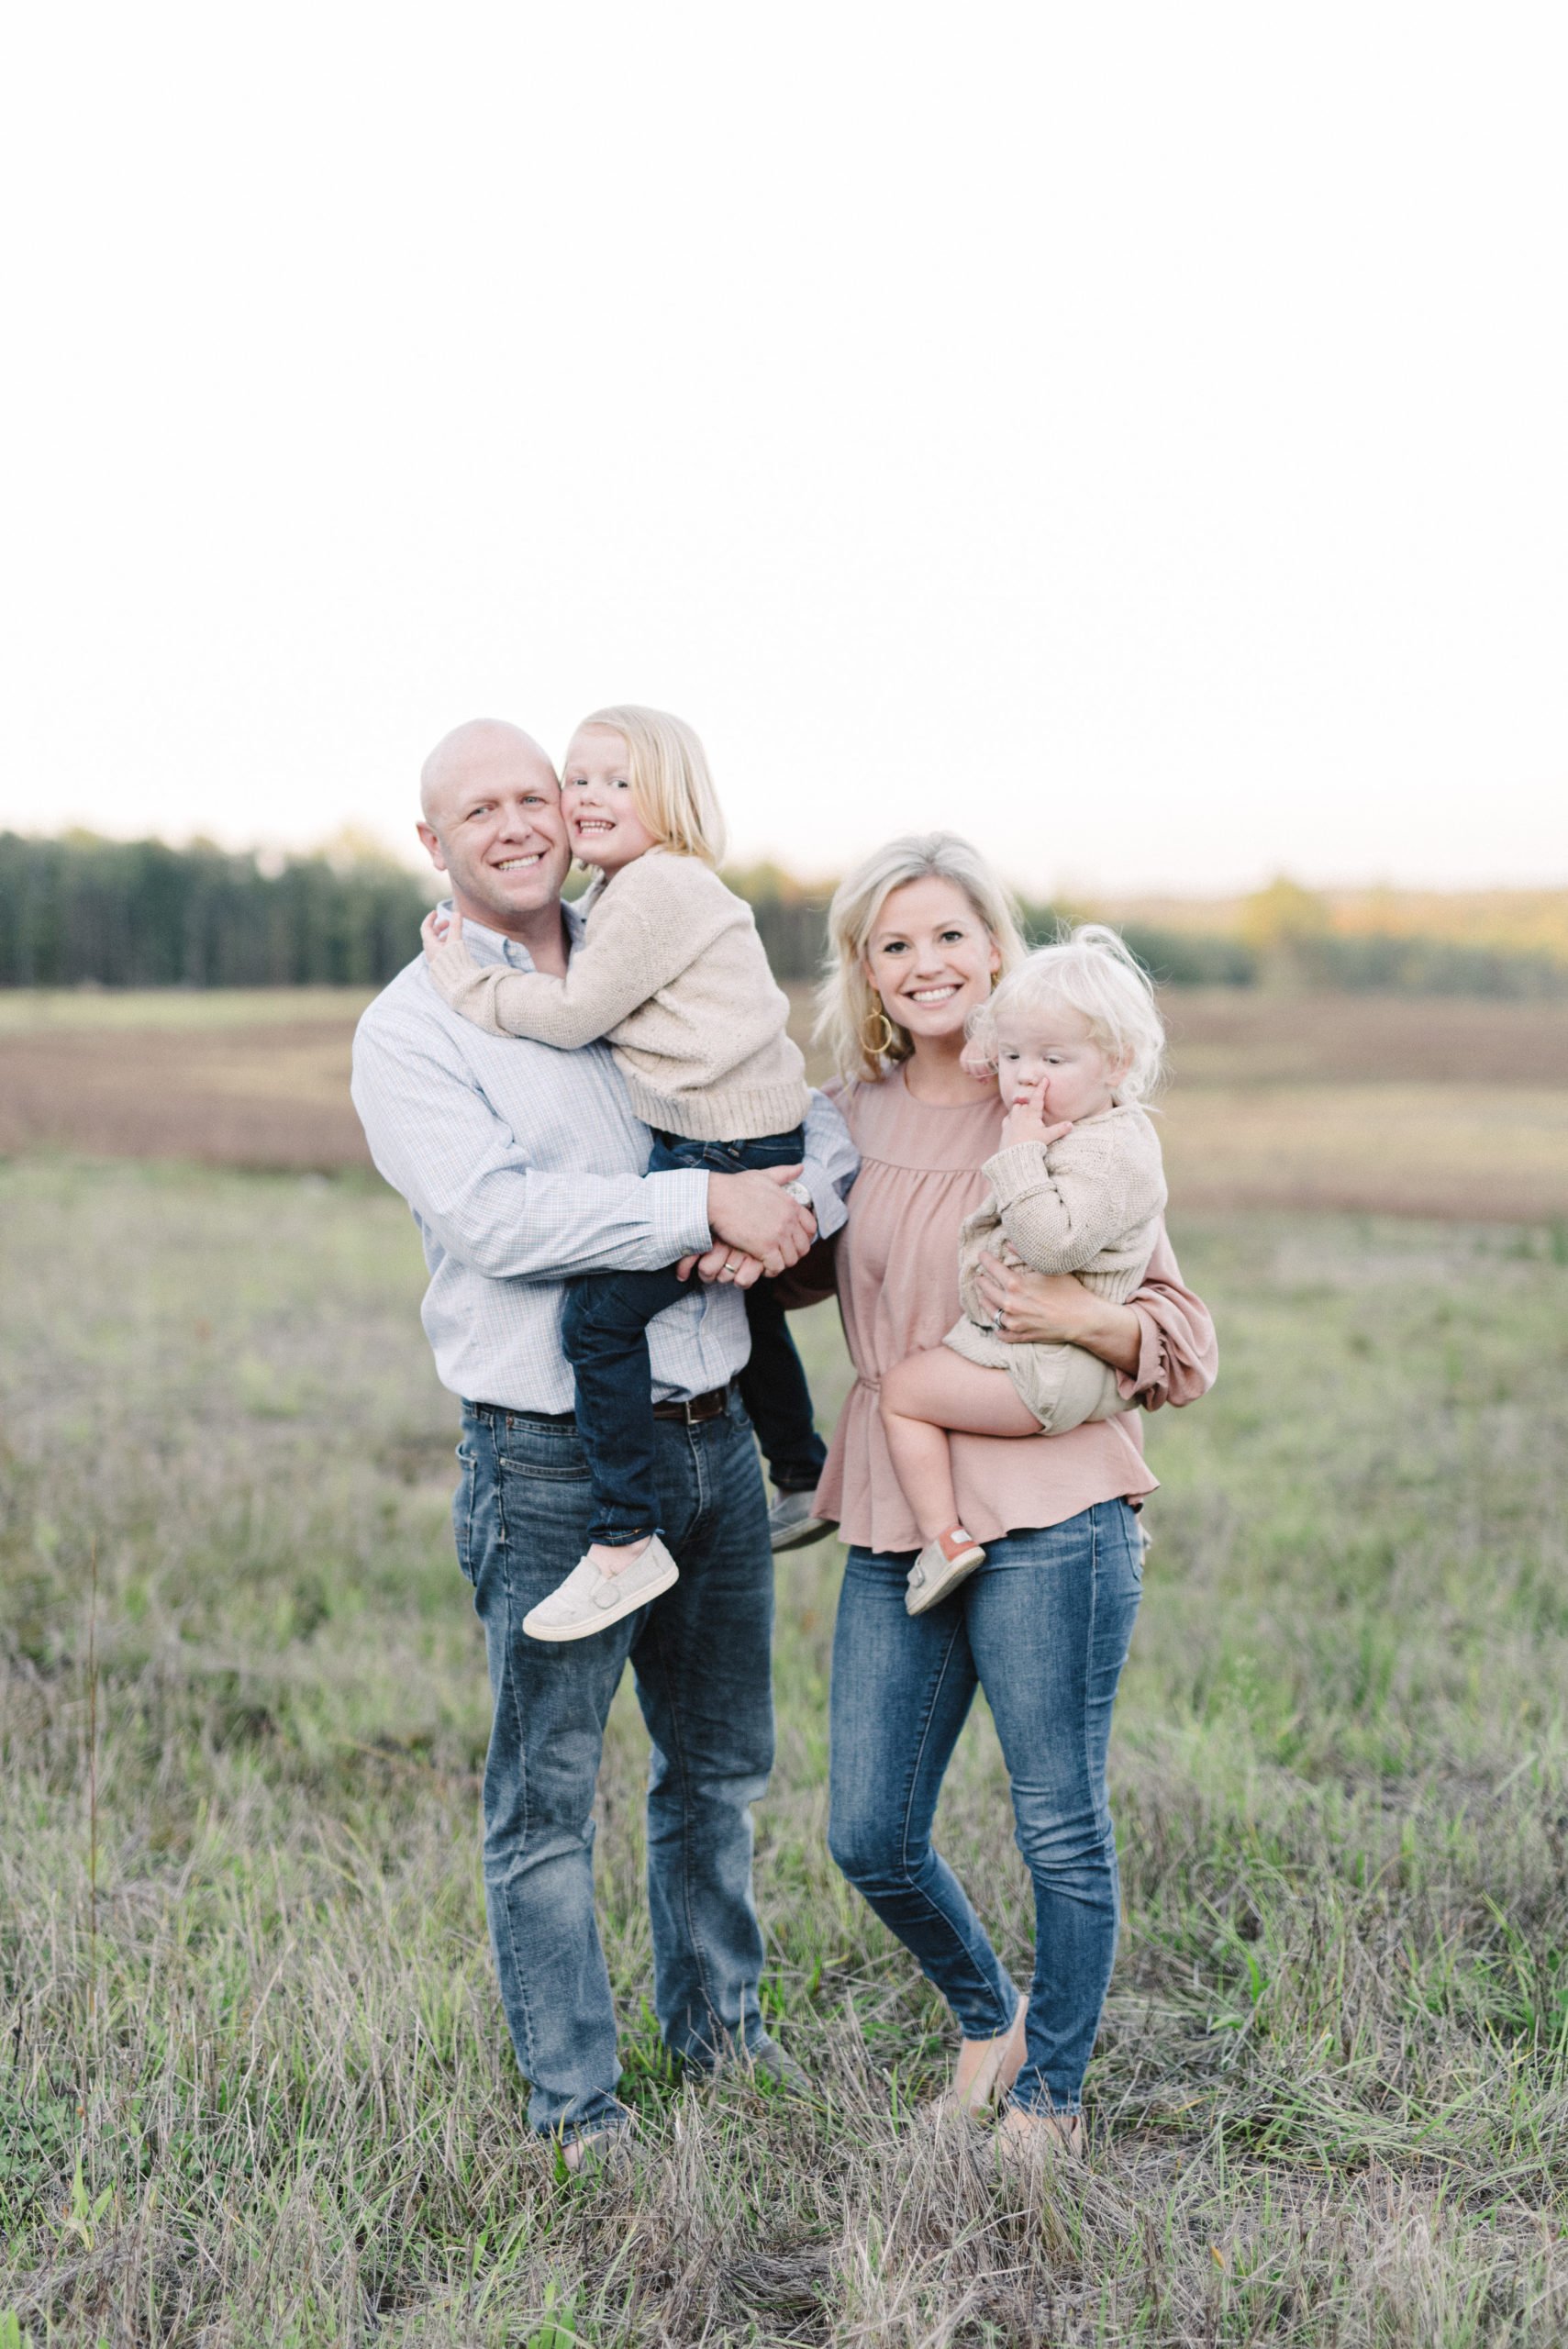 Hoover Alabama family photographer at Moss Rock